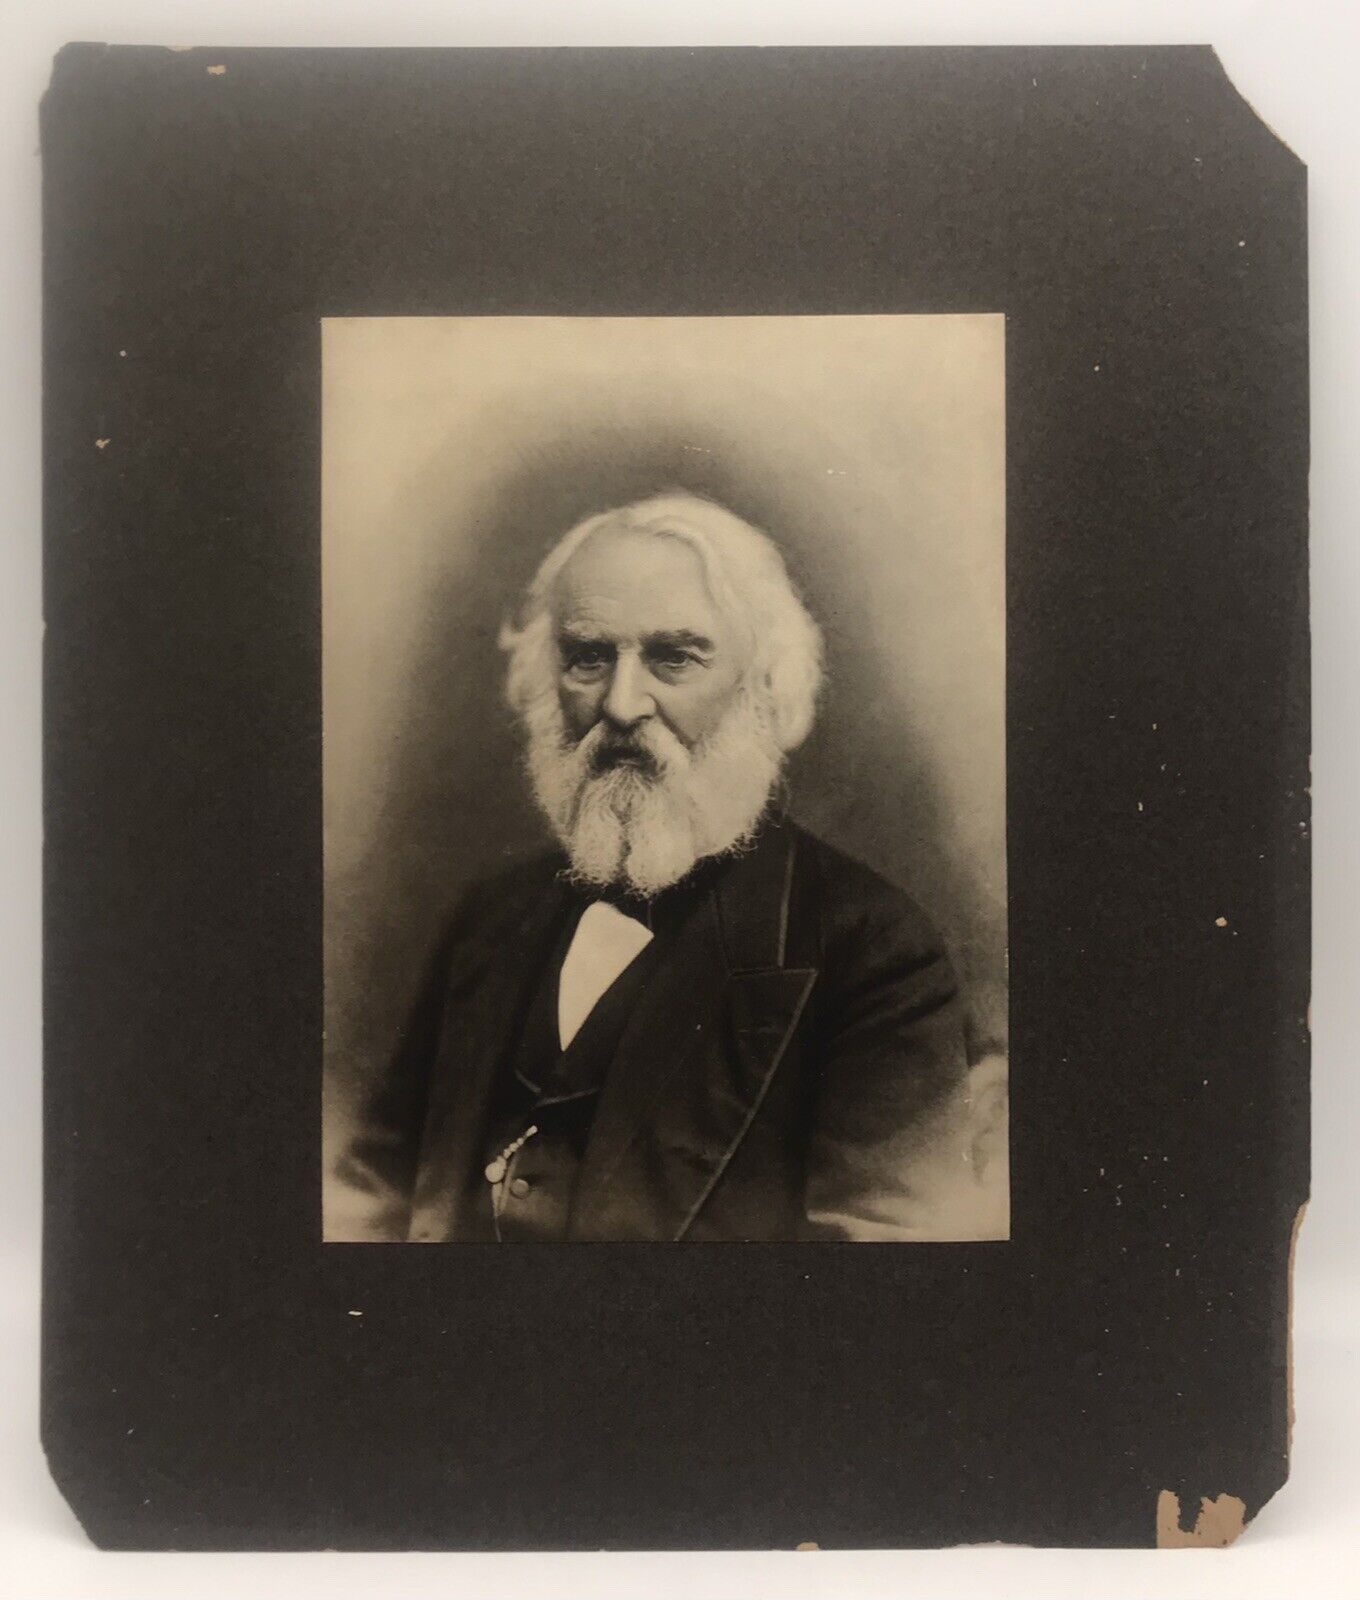 VINTAGE PICTURE OF THE FAMOUS HENRY WADSWORTH LONGFELLOW DATED 1807-1882